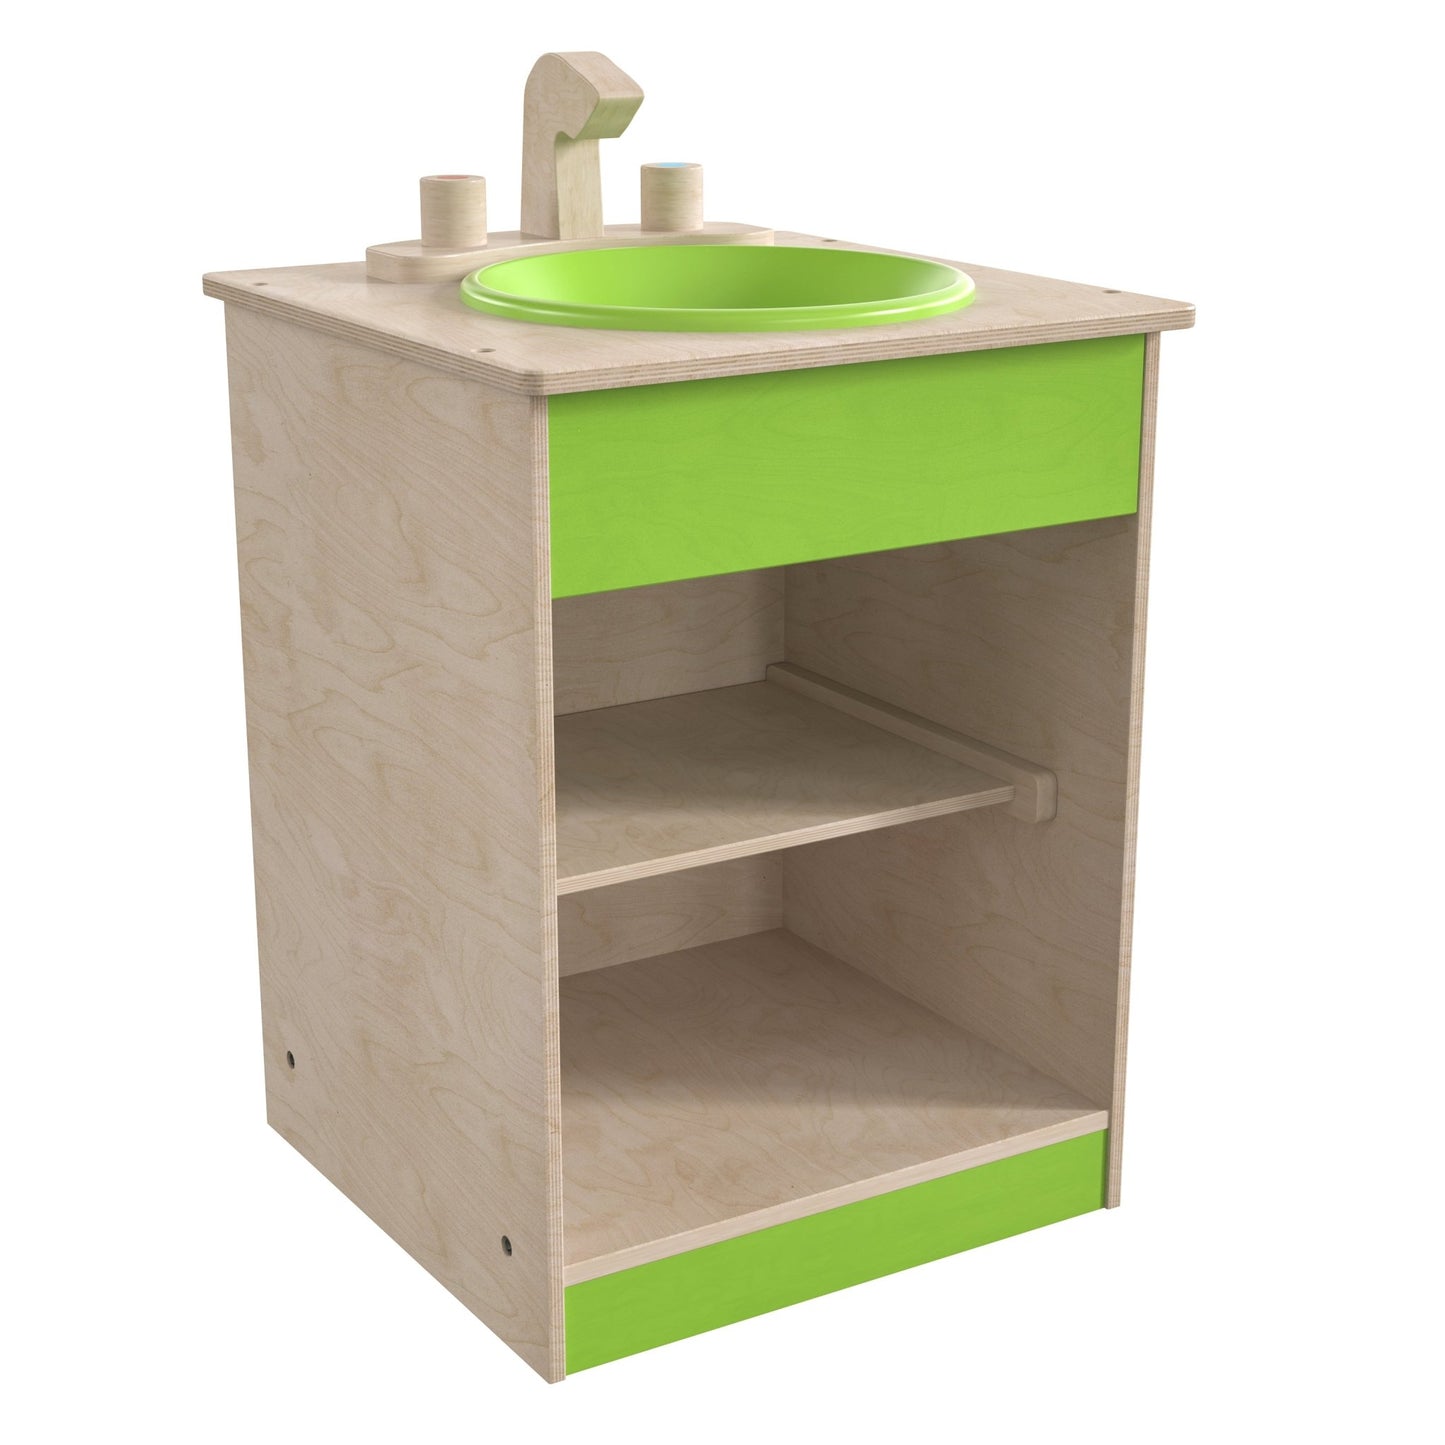 Bright Beginnings Commercial Grade Wooden Children's Kitchen Sink with Integrated Storage - SchoolOutlet